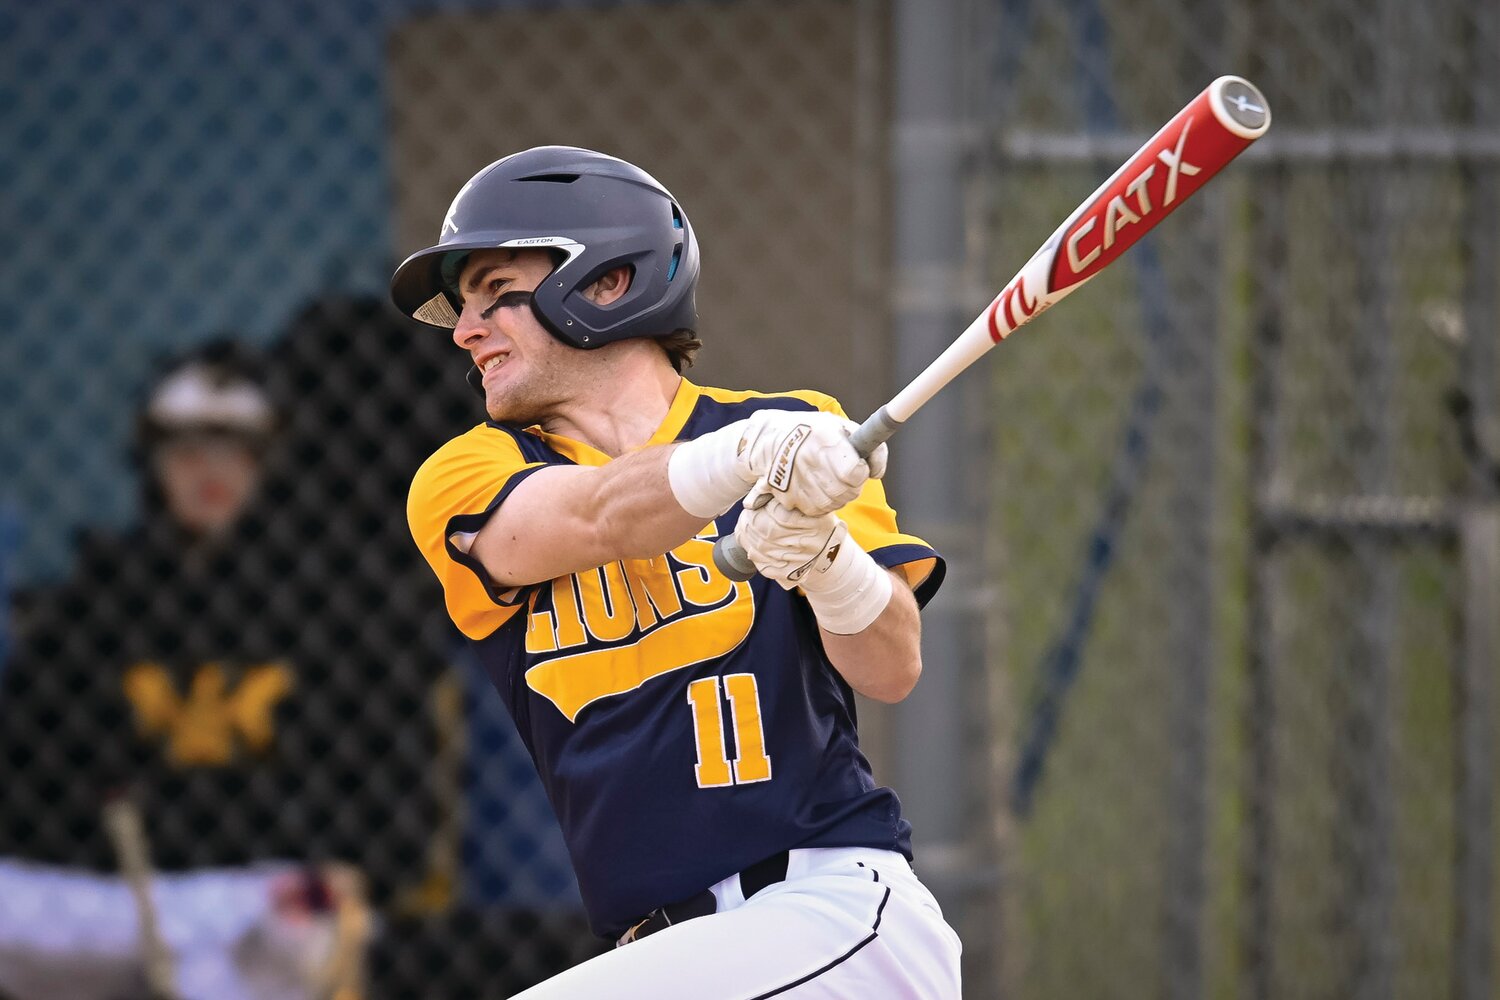 New Hope-Solebury’s Joel Carmenini watches his base hit in the second inning.